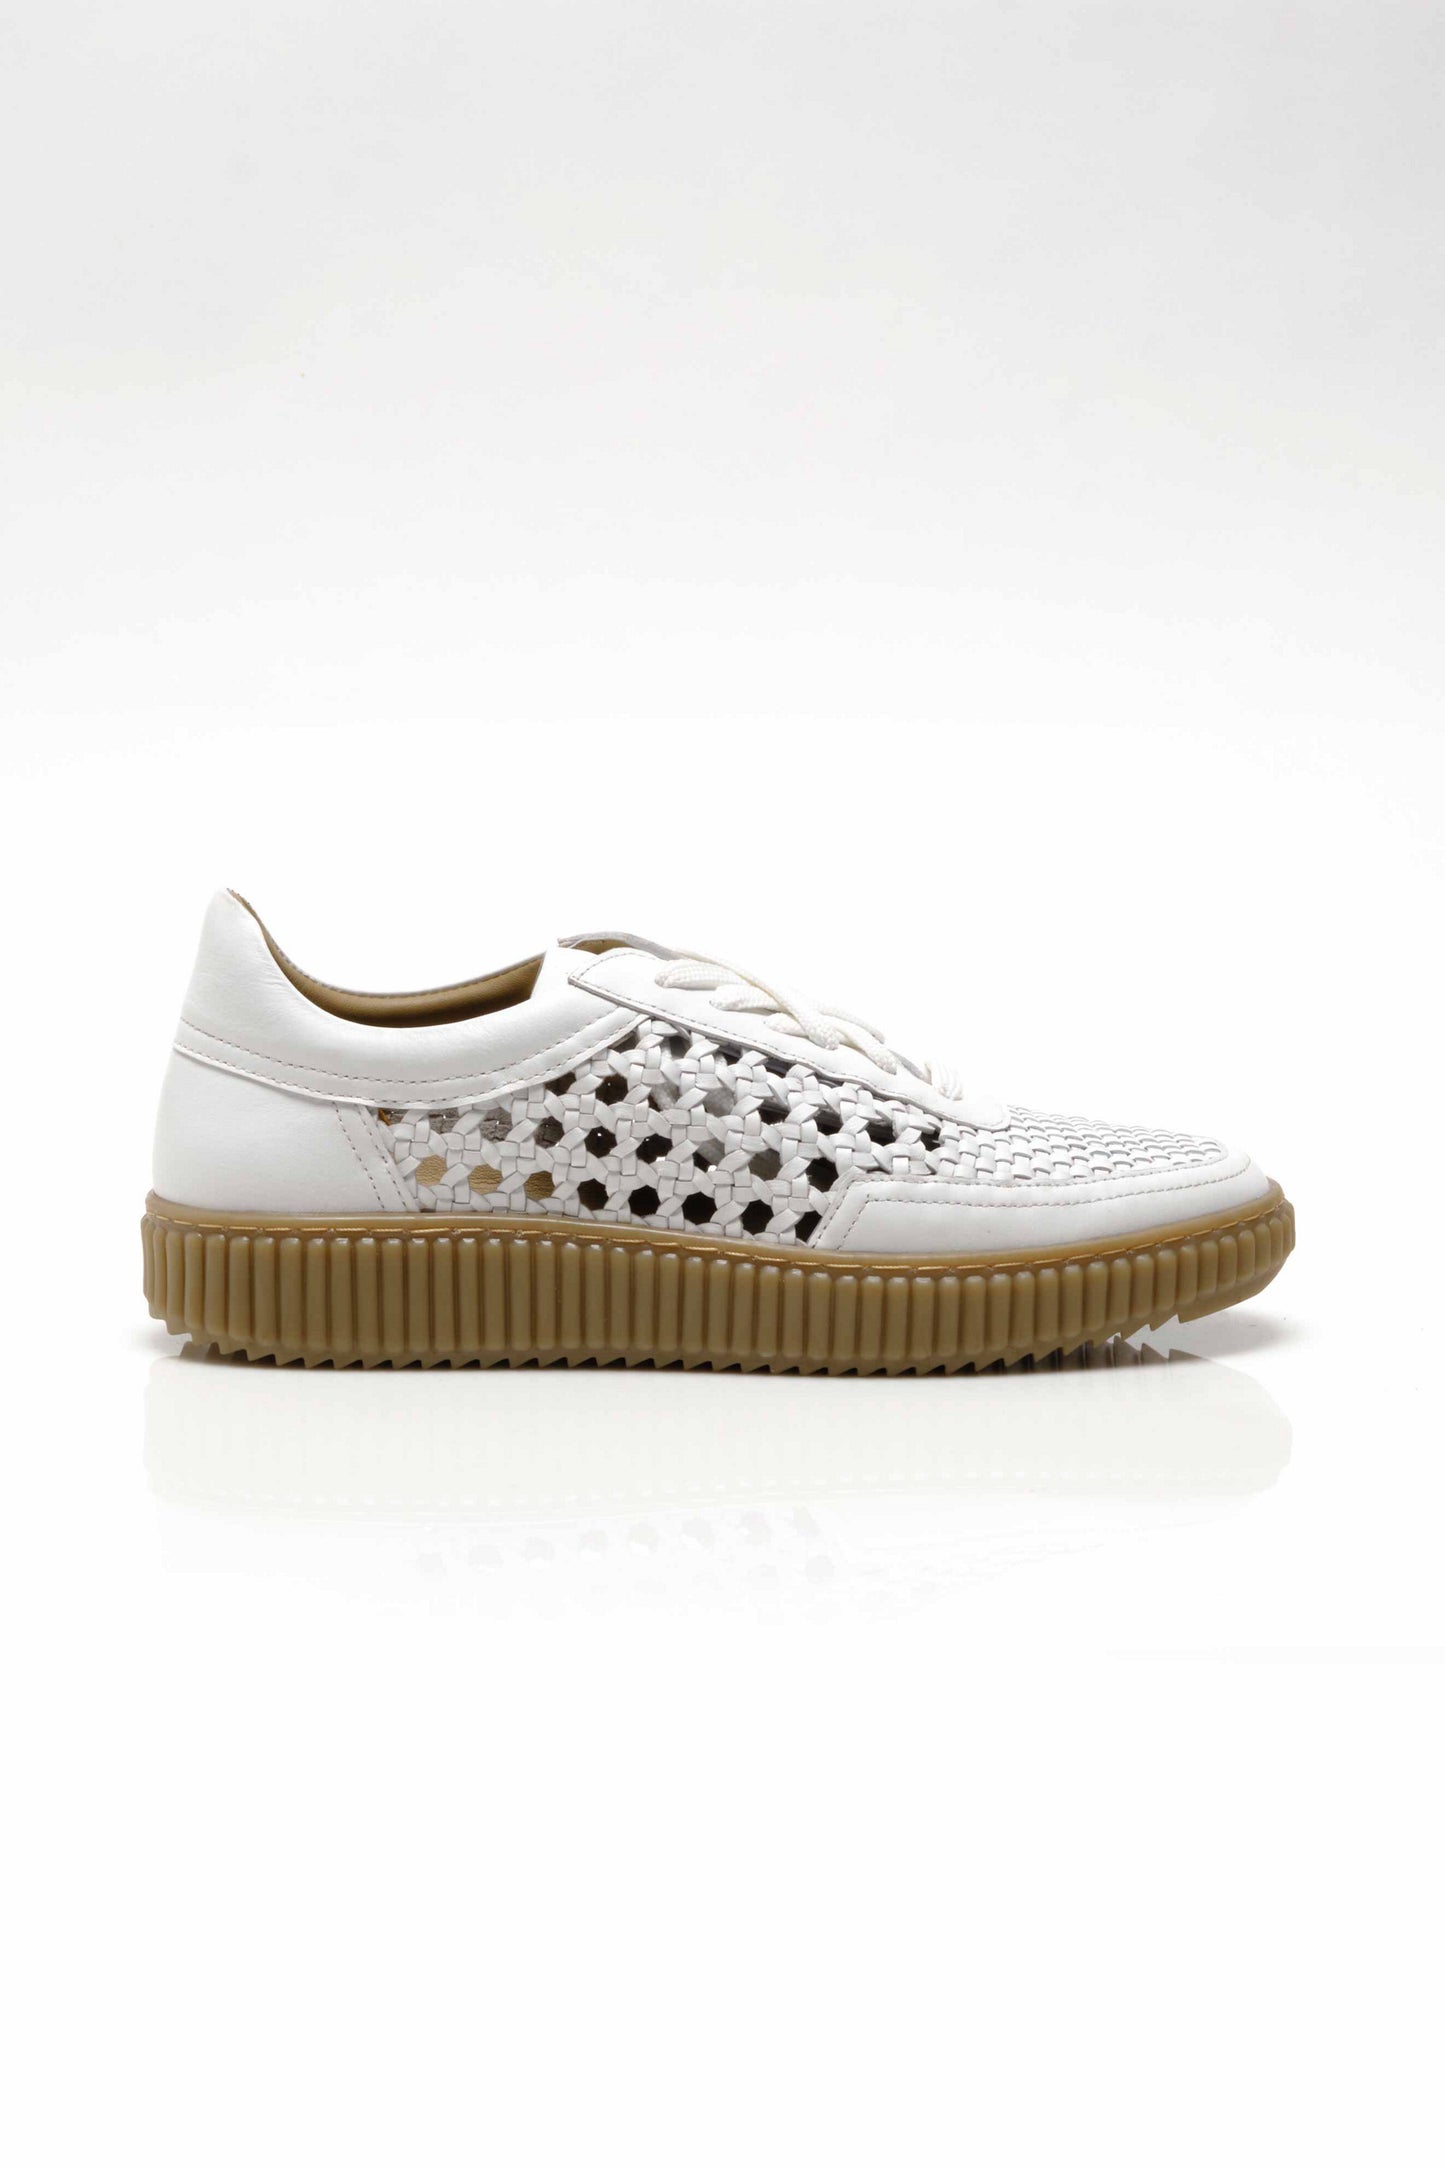 Load image into Gallery viewer, Free People: Wimberly Woven Sneaker - White Leather
